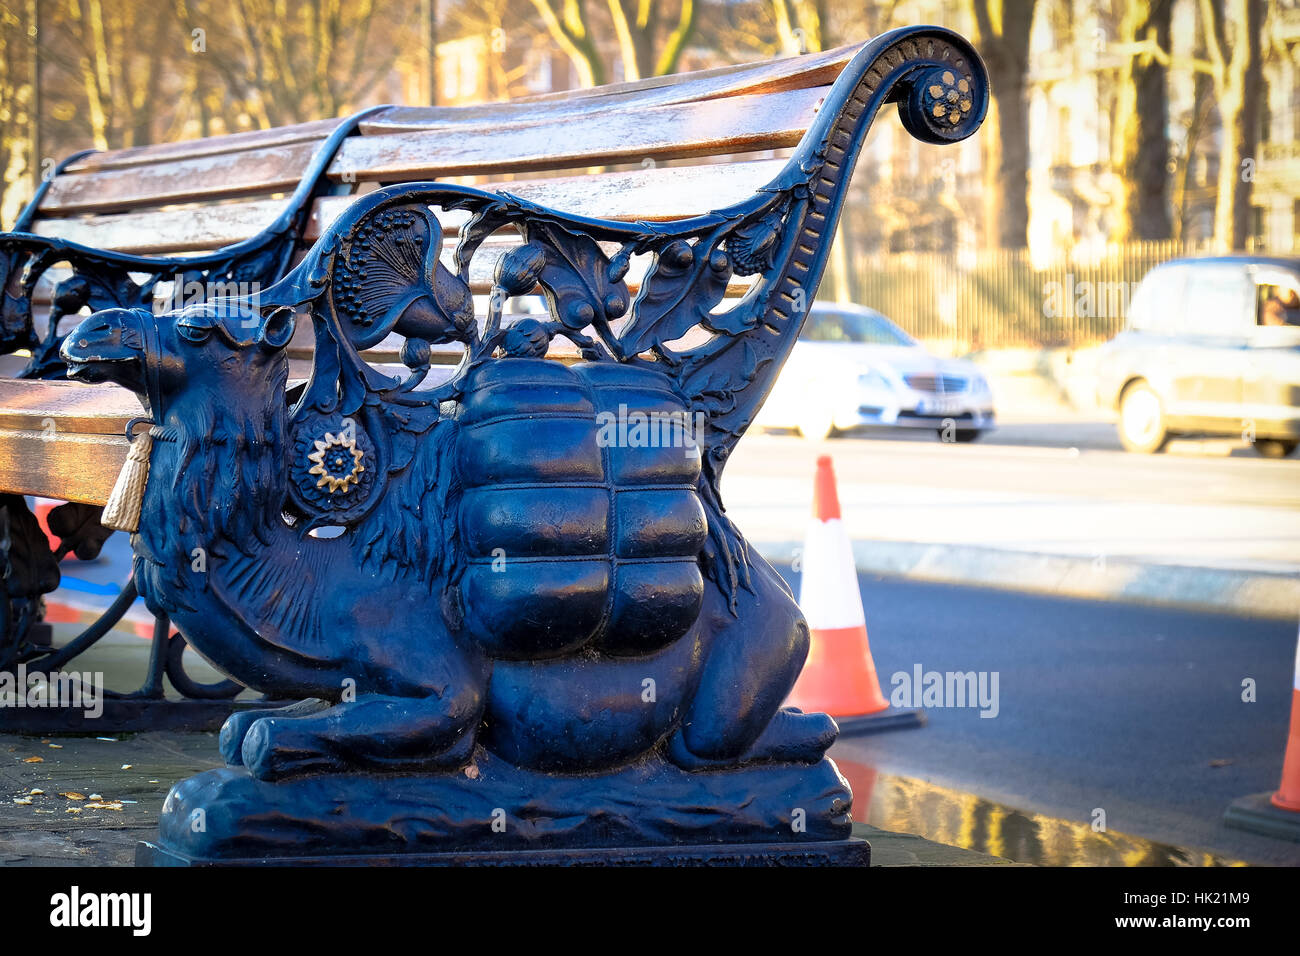 A city bench with carving of camel as part of its design Stock Photo